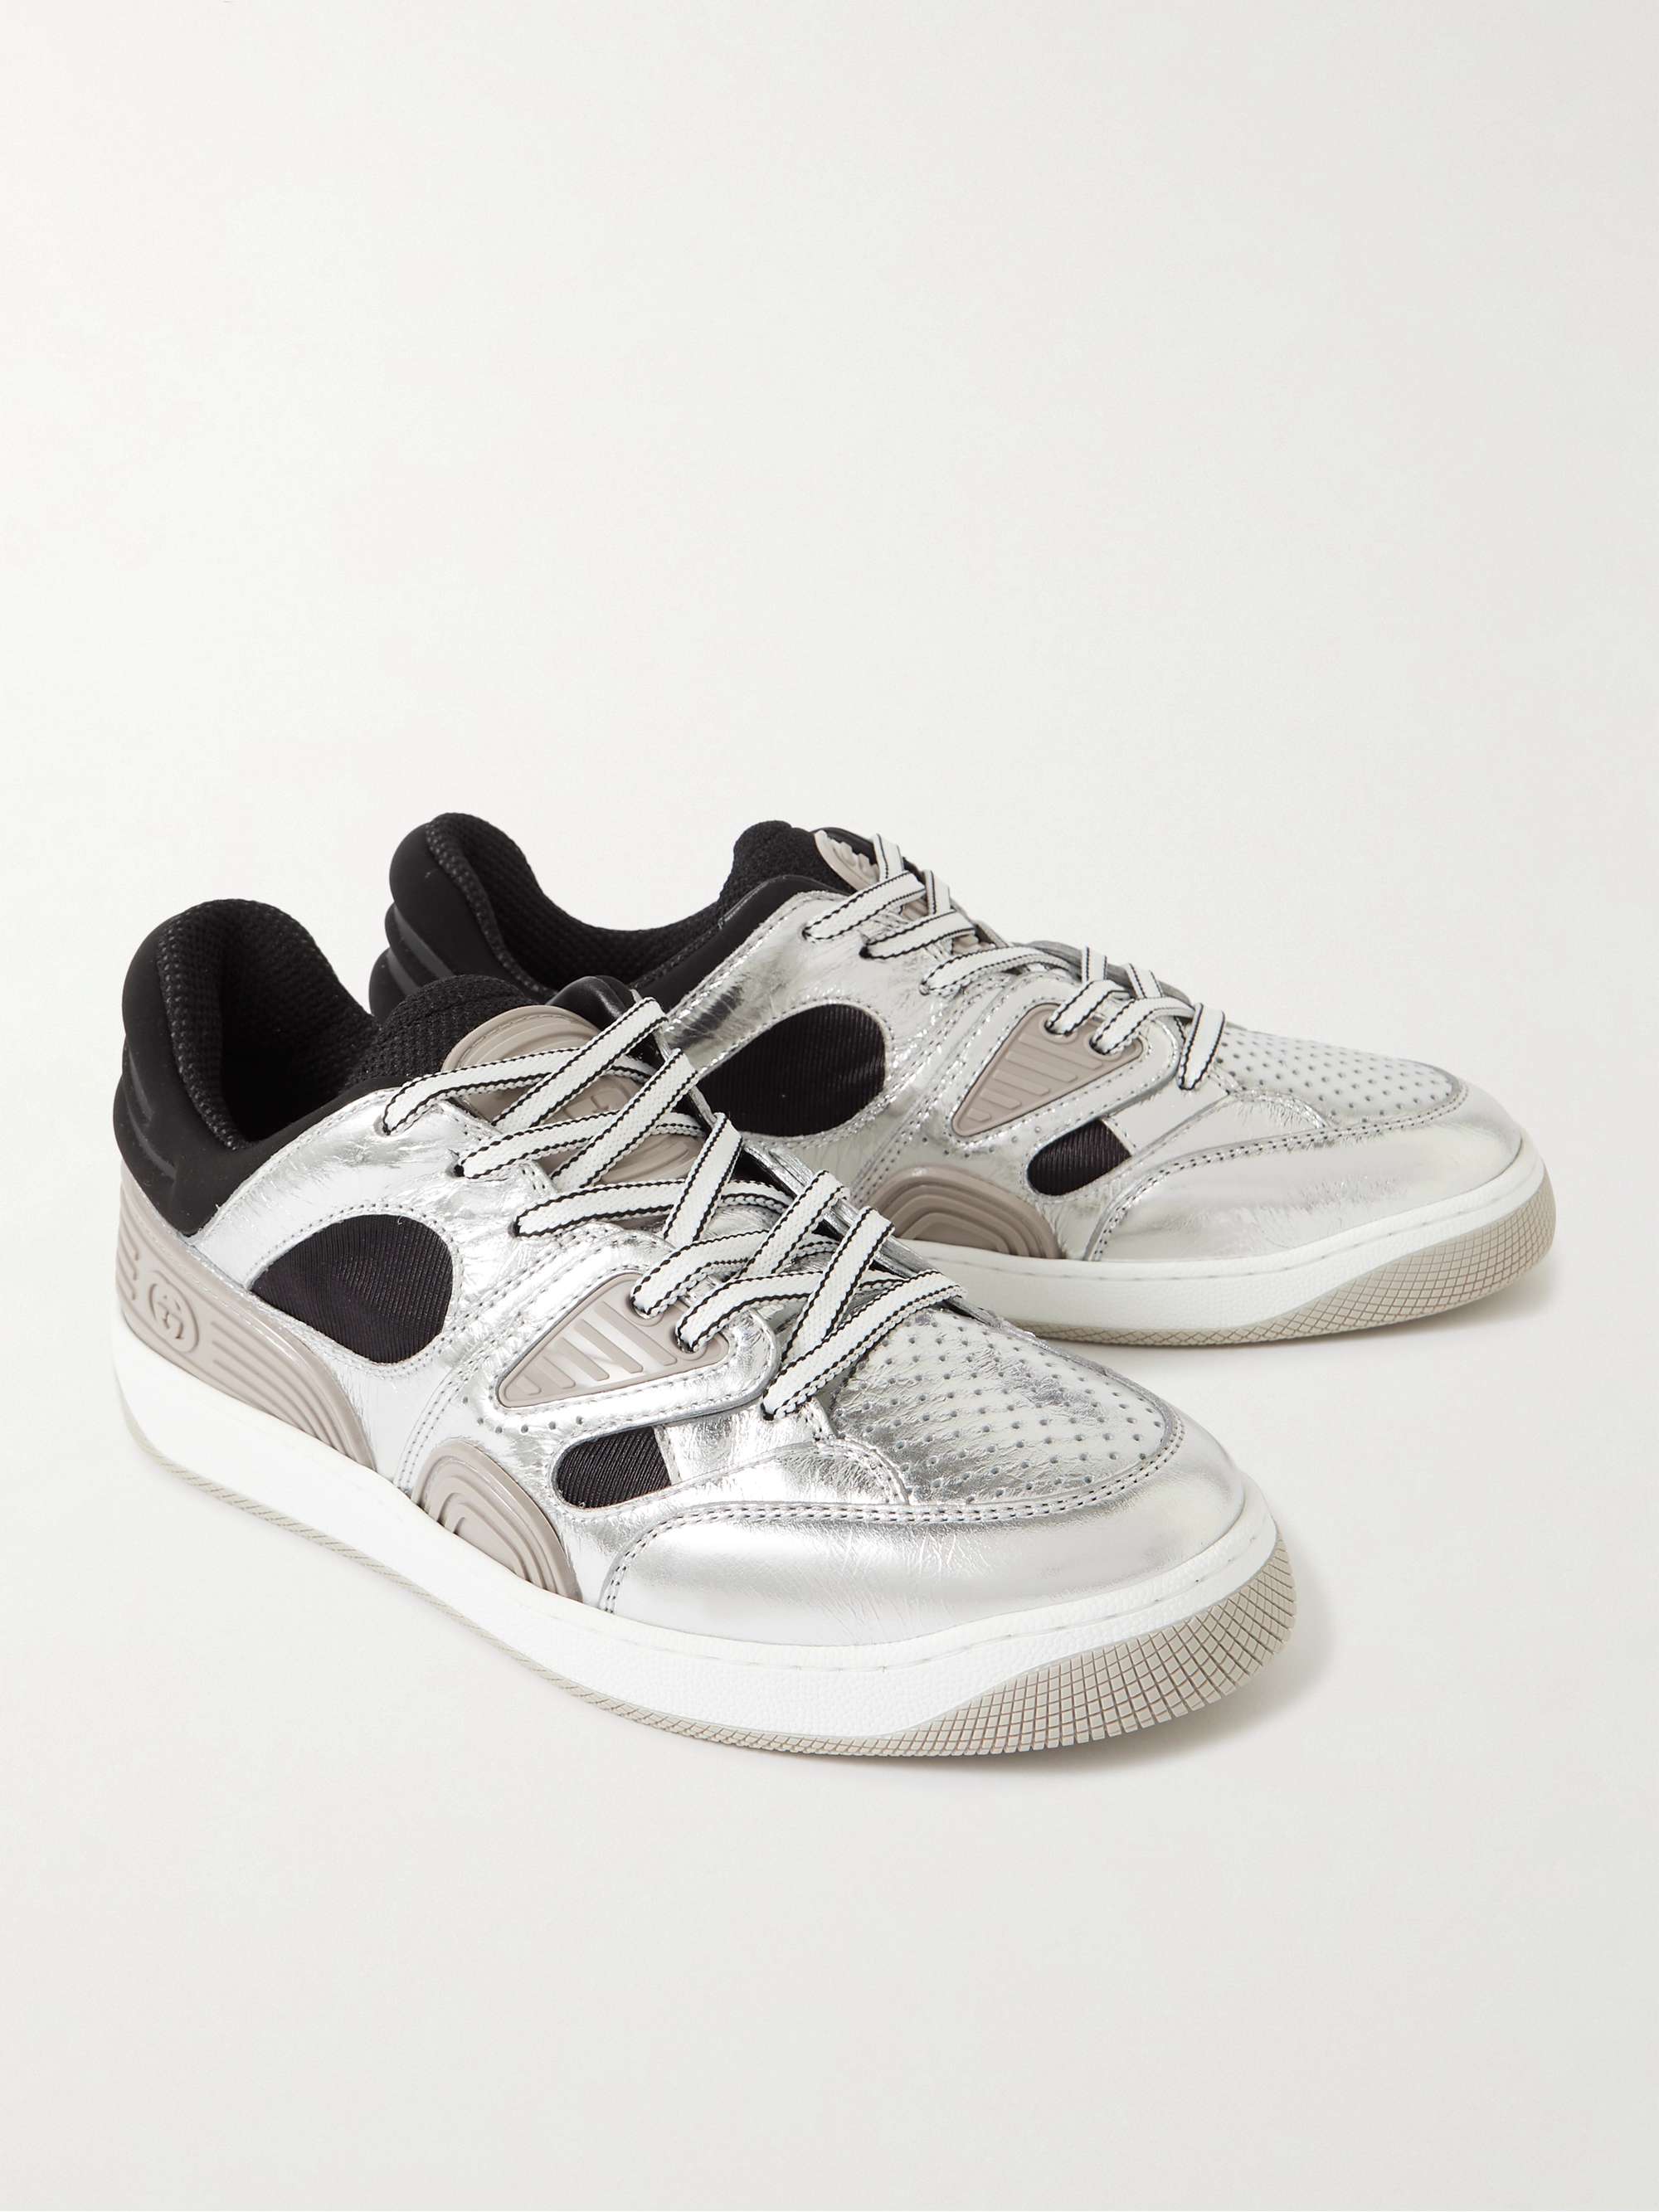 GUCCI Basket Distressed Metallic Leather, Jersey, Mesh and Rubber Sneakers